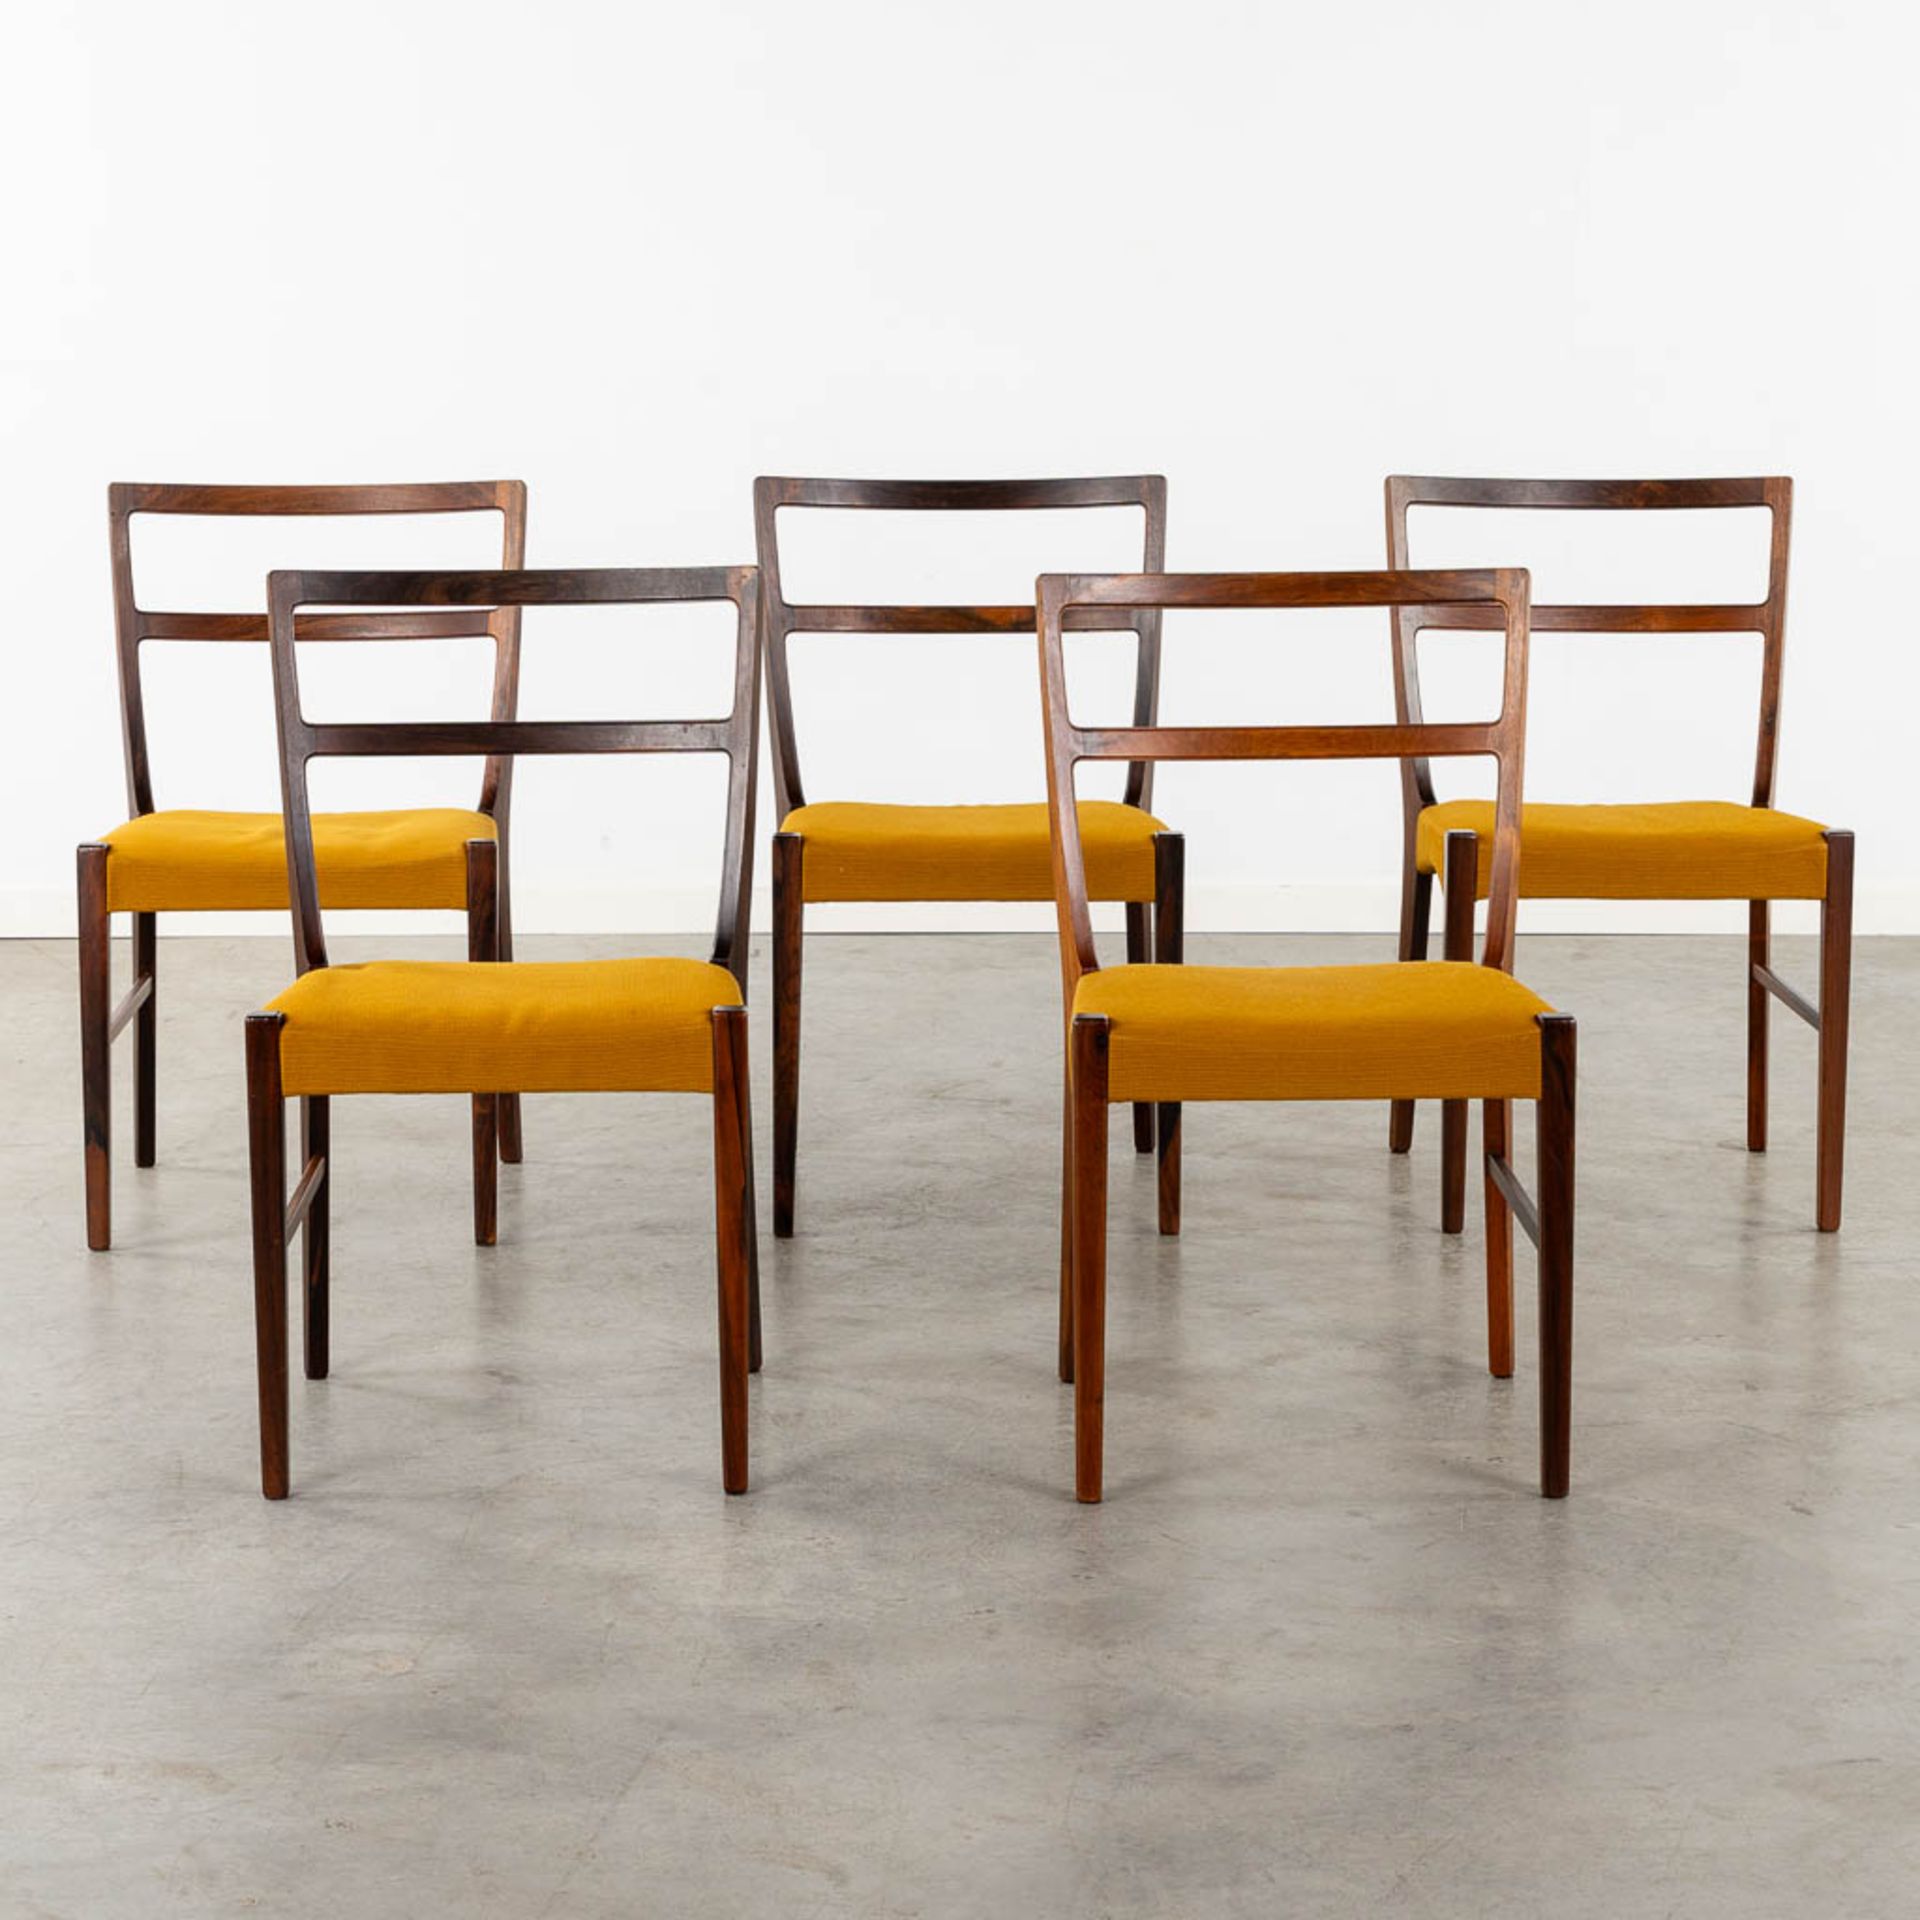 Johannes ANDERSEN (1903-1997) '5 Dining Chairs' for Bernhard Pedersen and Son. (L:52 x W:45 x H:80 c